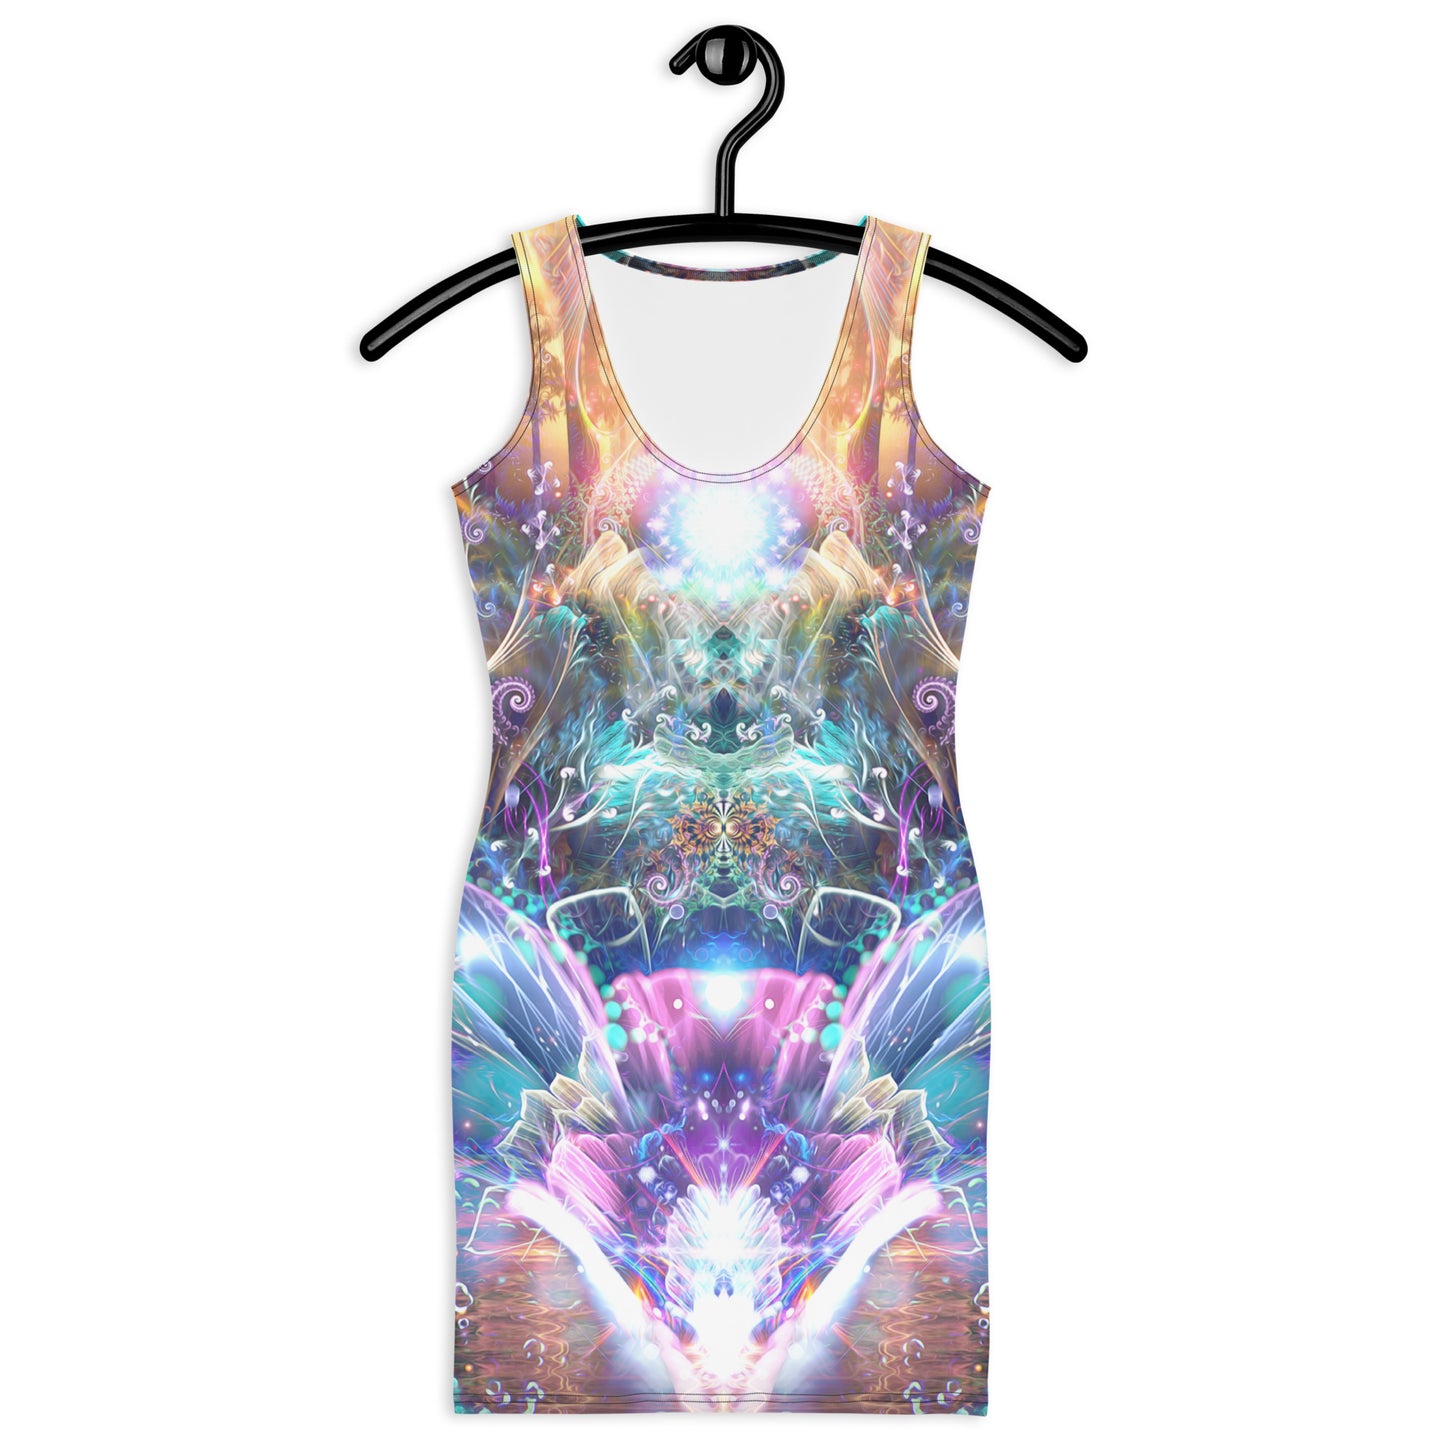 "Medicina" Bodycon FITTED DRESS